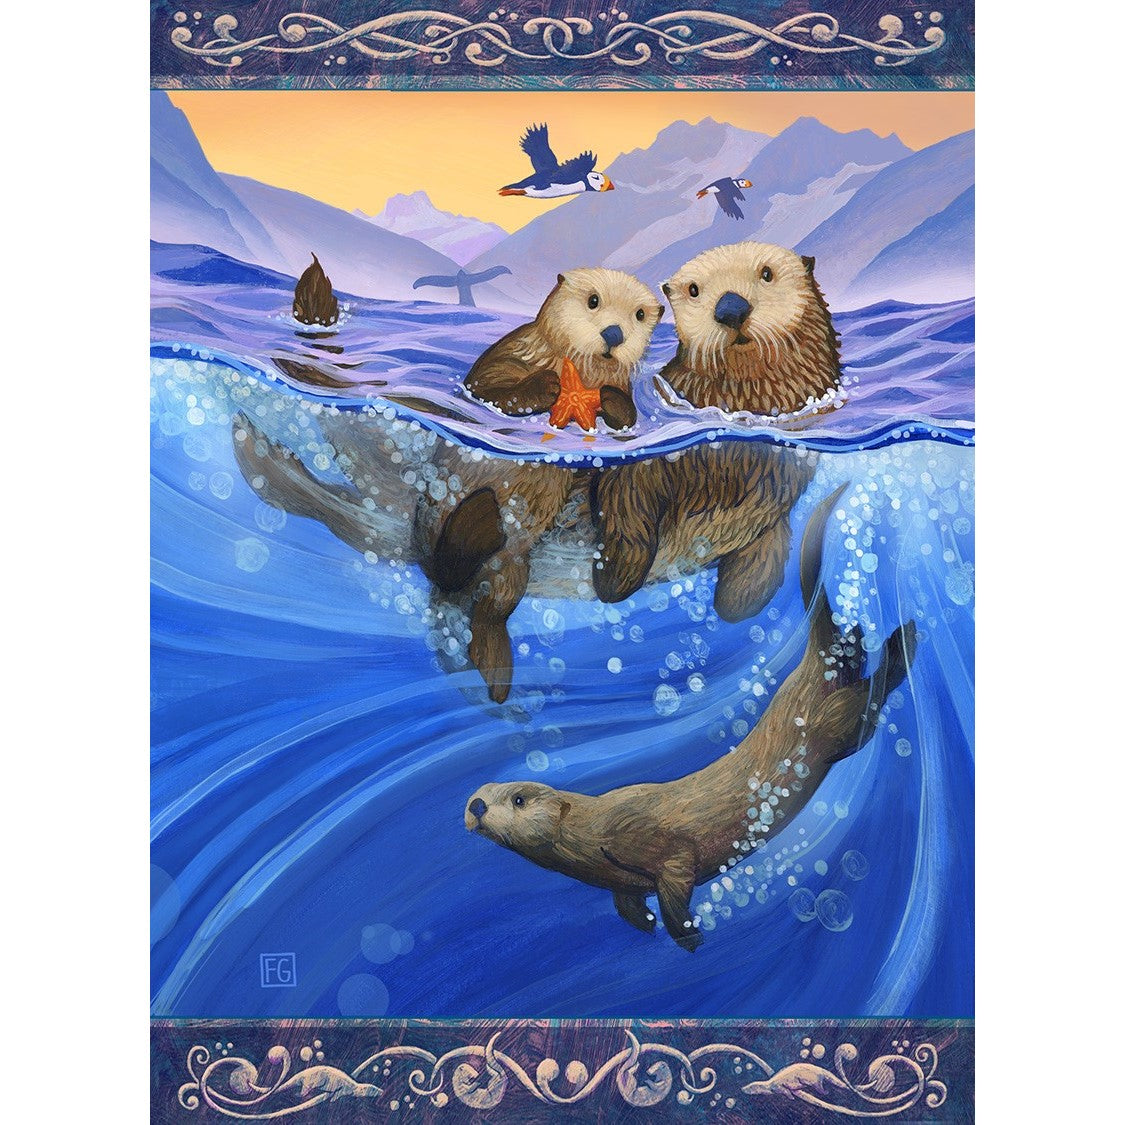 Otter Play- Wood Block by artist Francois Girard